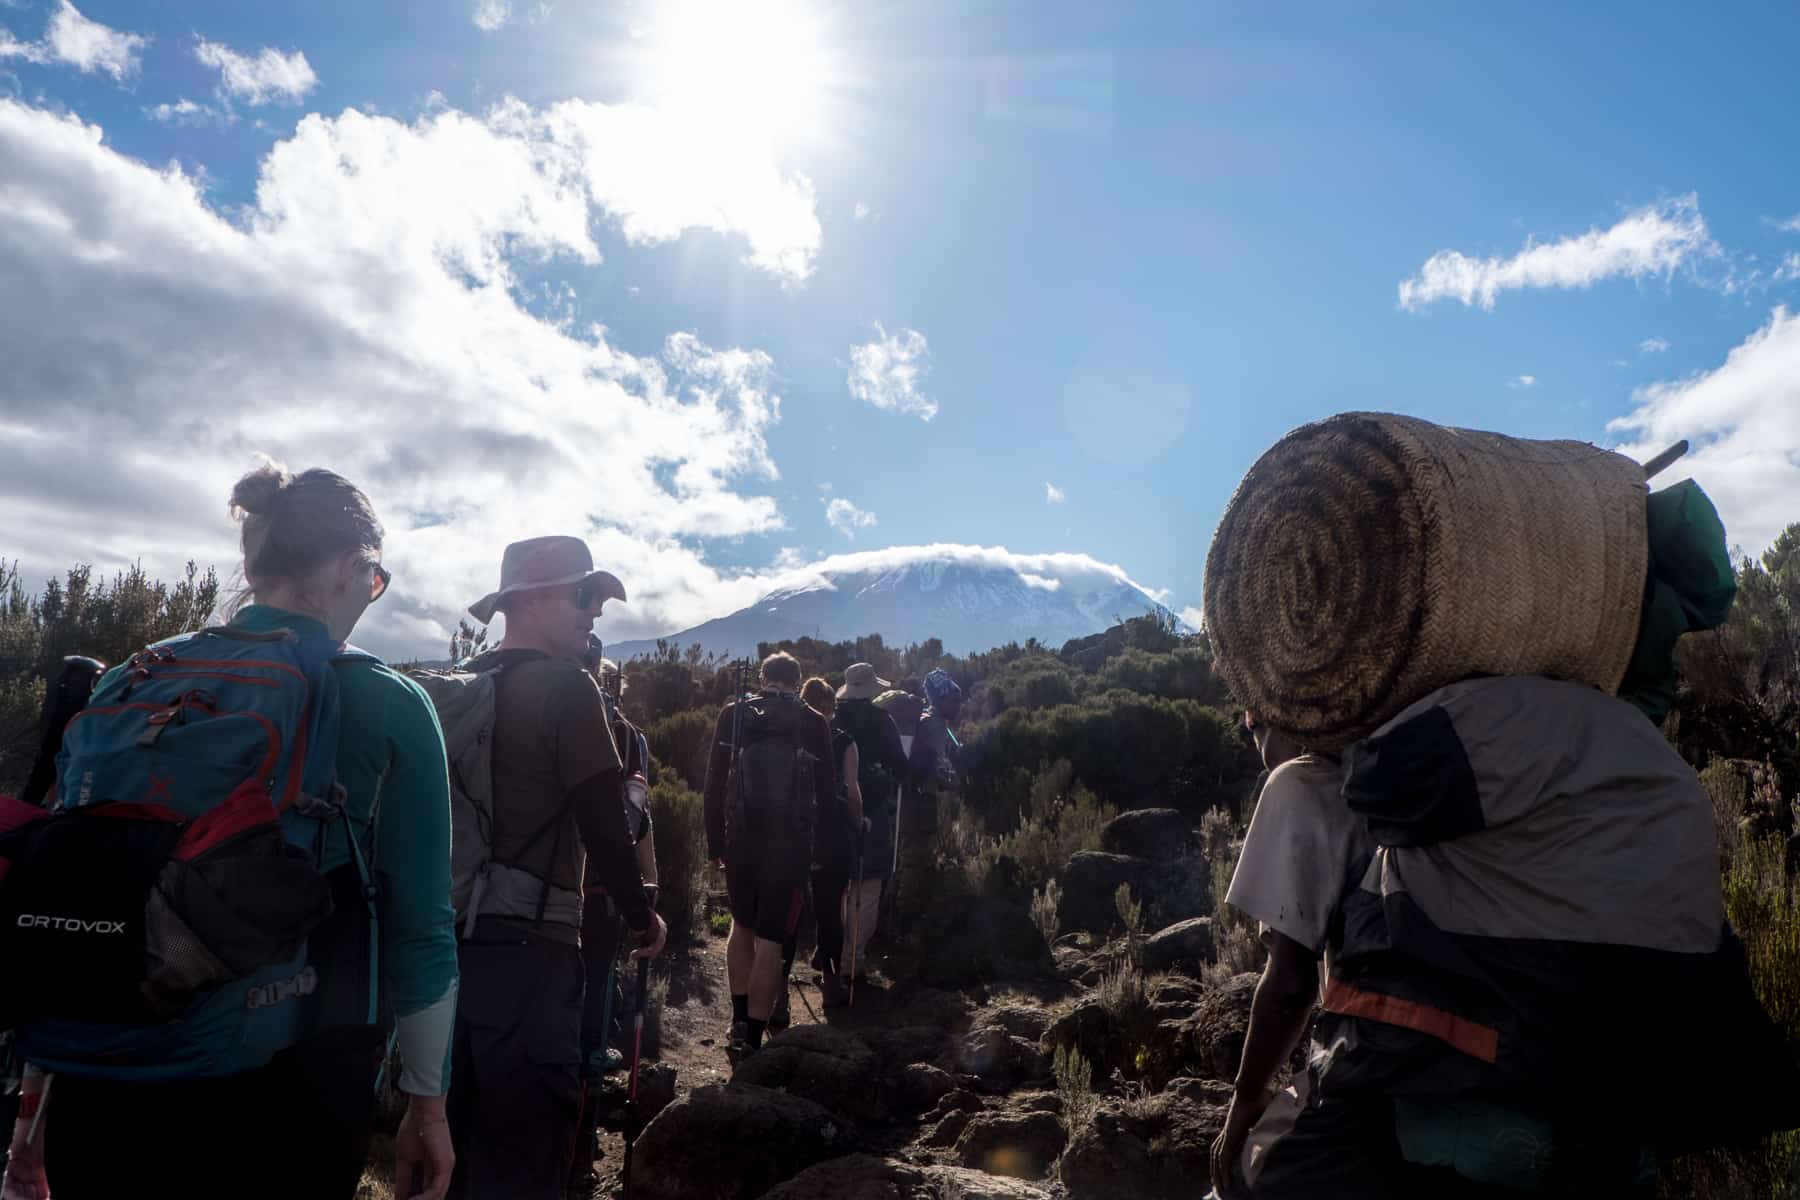 A small trekking group climbing Kilimanjaro moorland with a view of the snow-capped Kibo Peak ahead